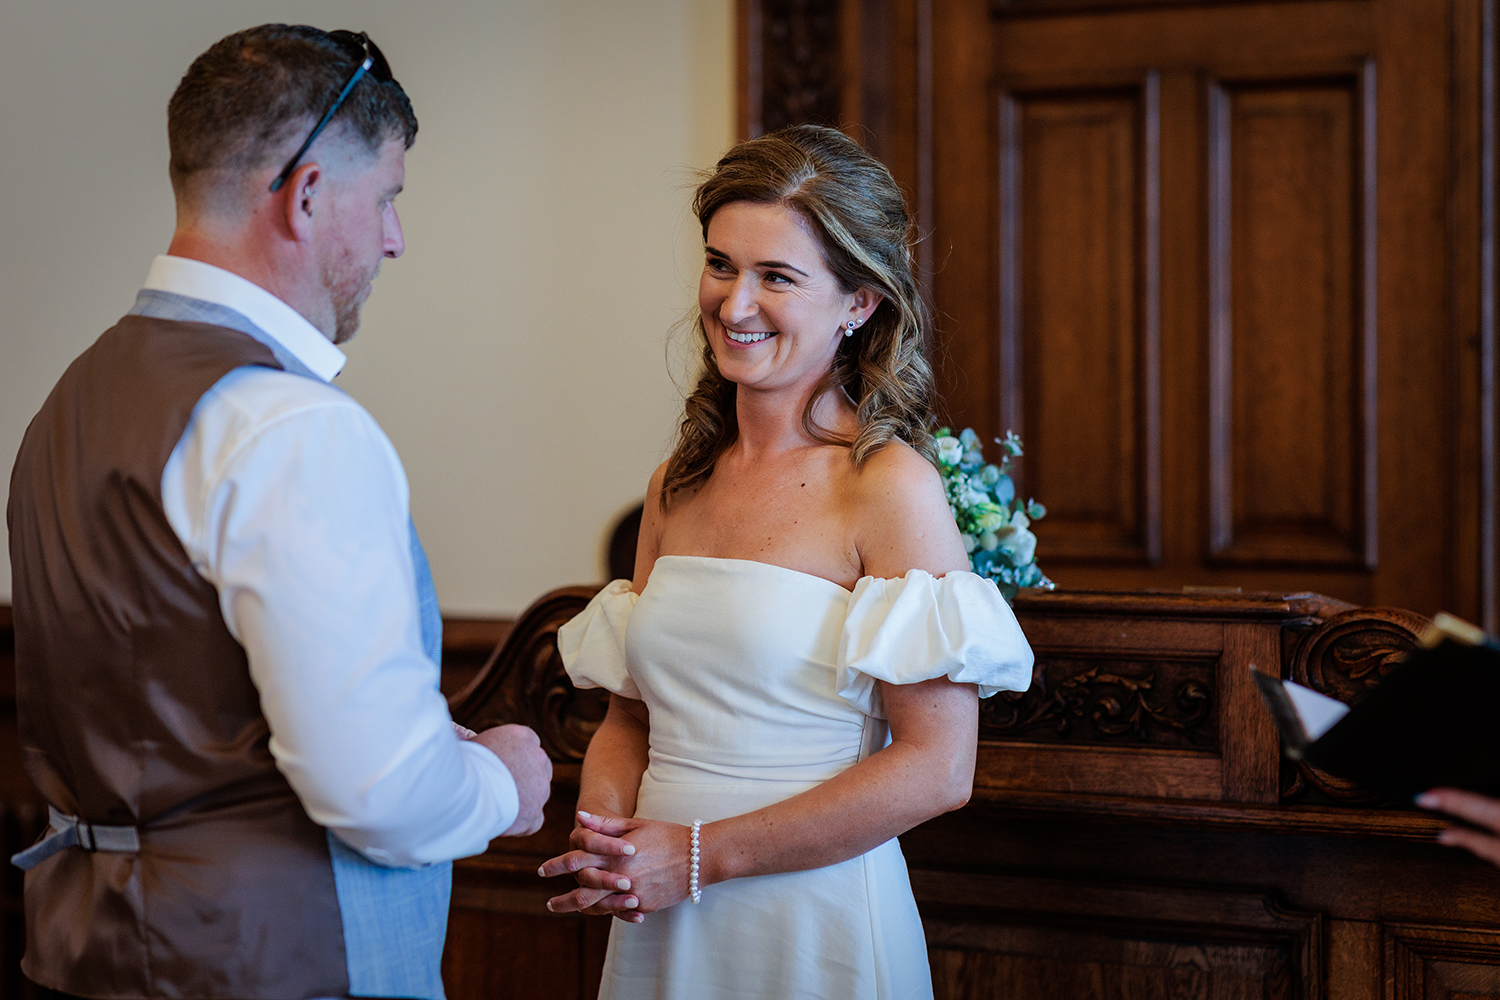 The bride smiles at her husband to be as they take their vows at their elopement wedding in Jersey